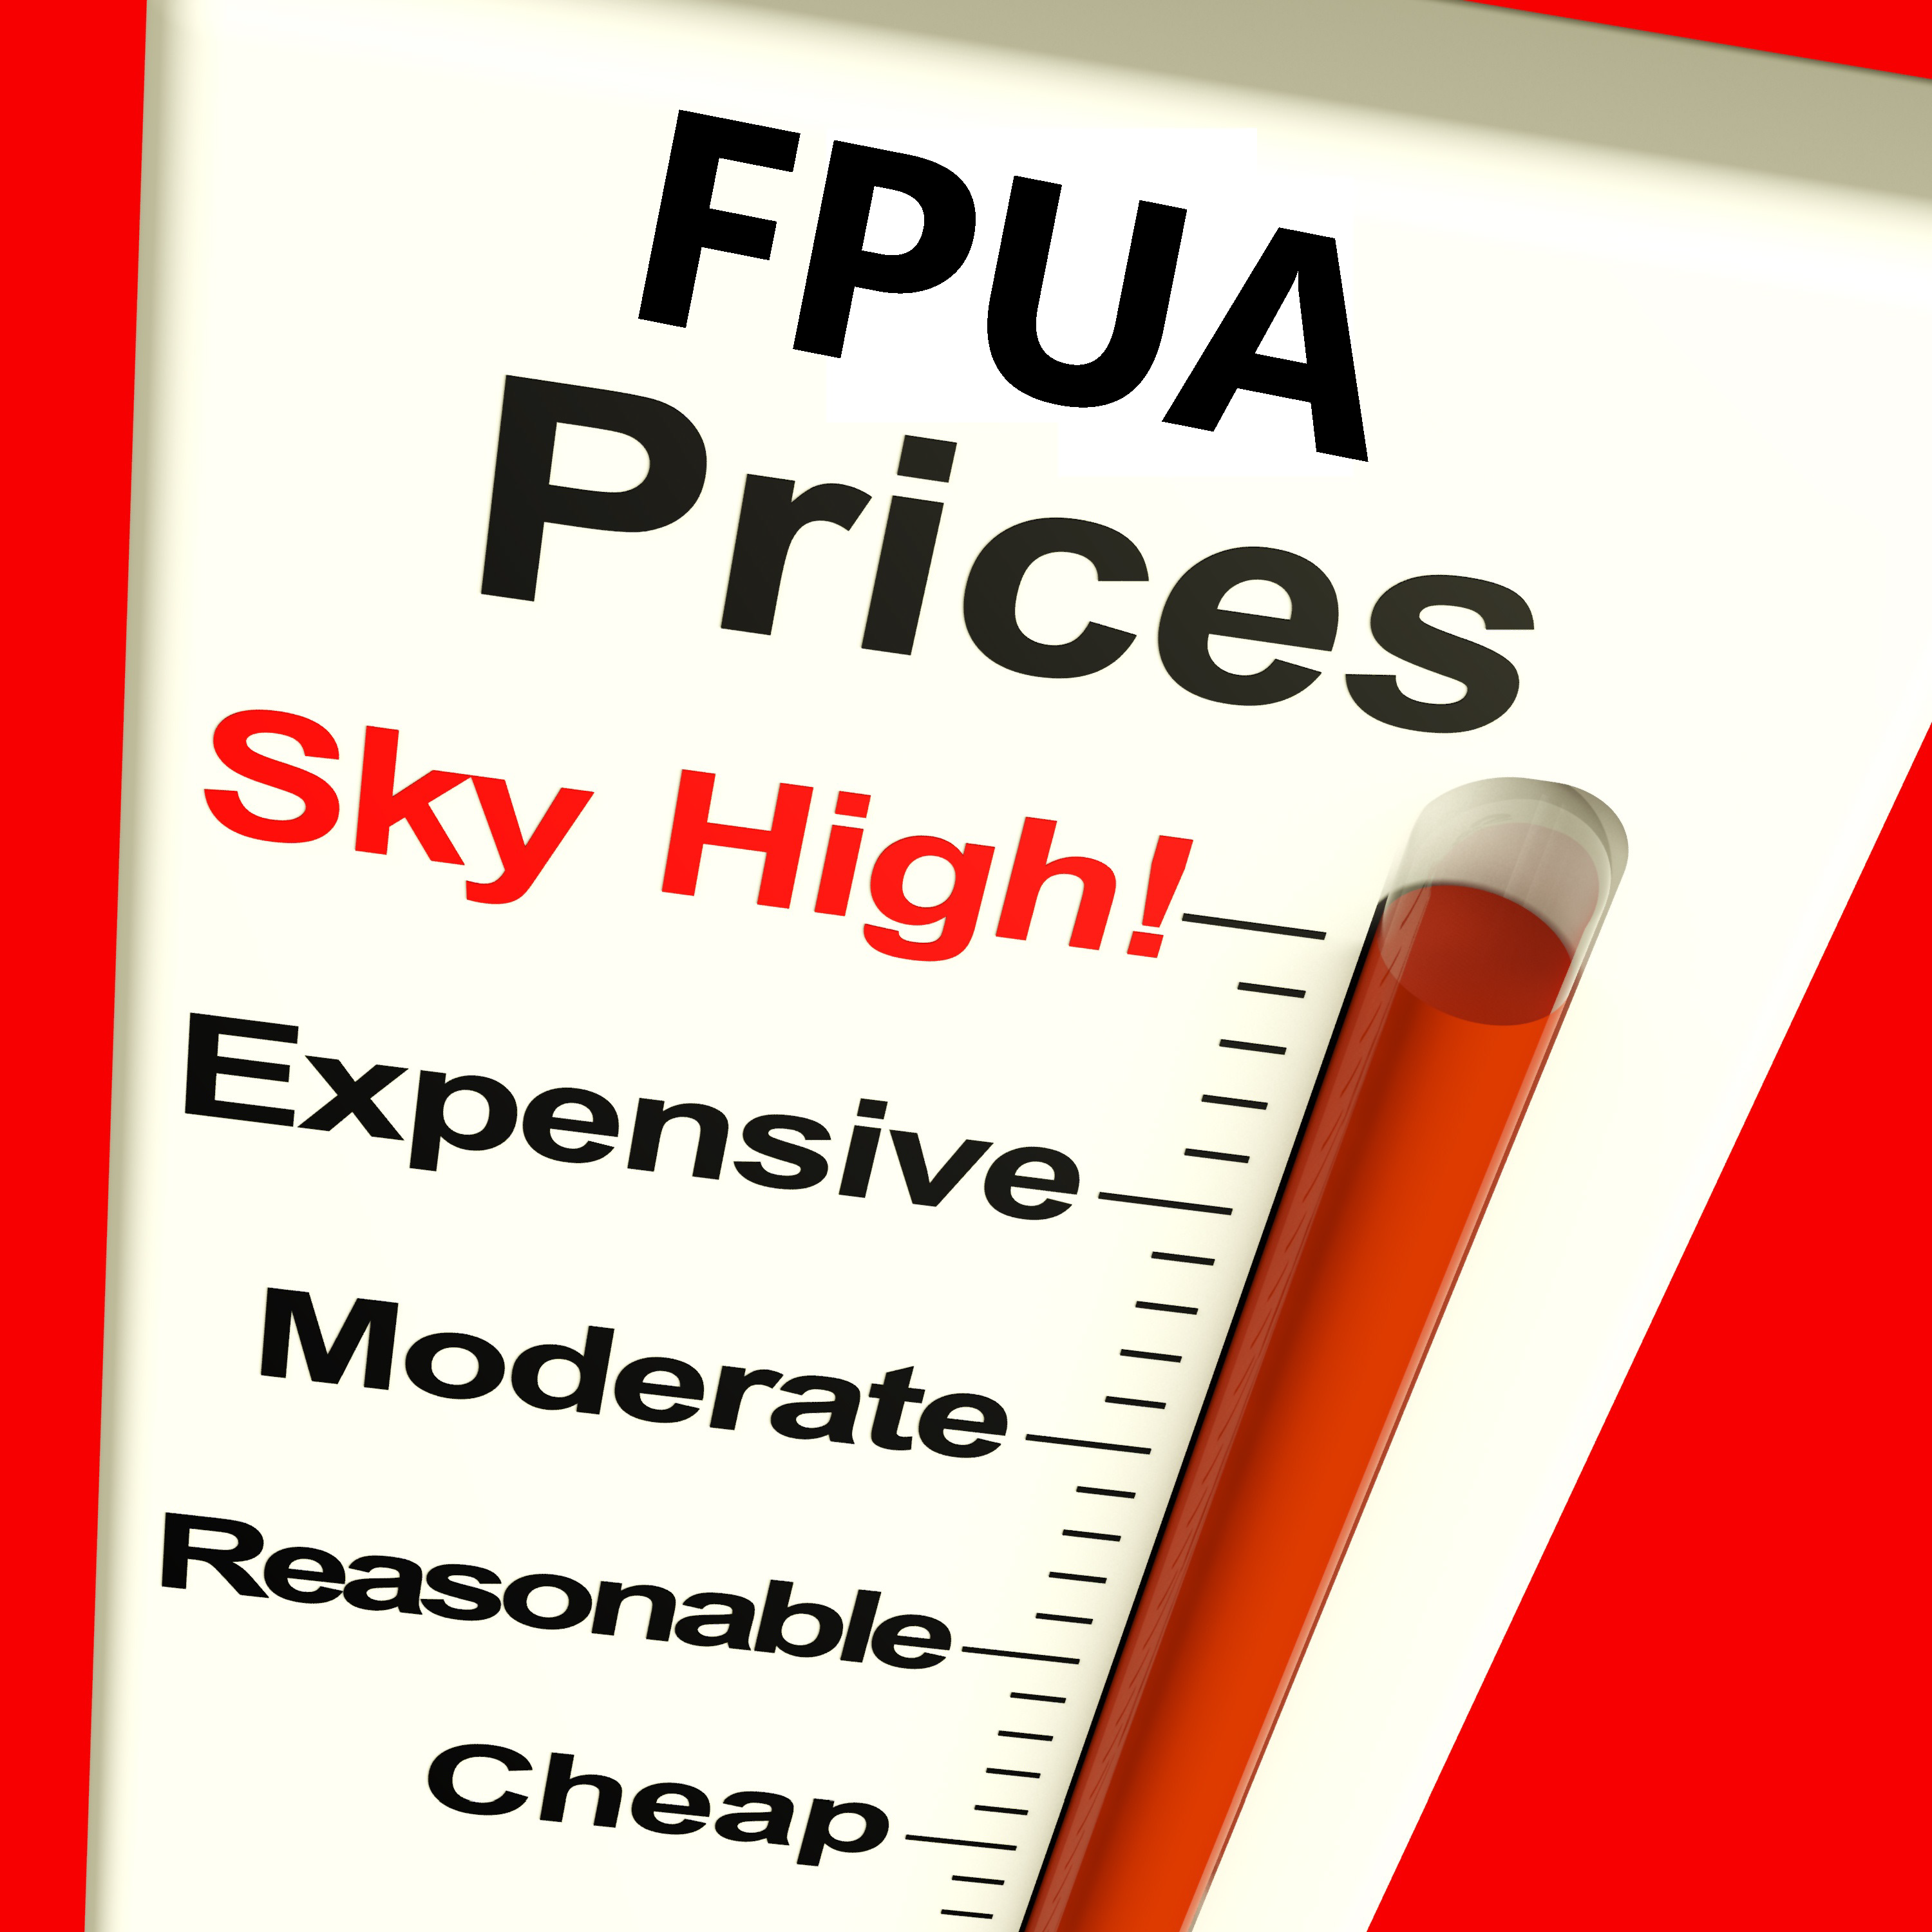 FPL reducing rates again as FPUA customers continue to get hosed